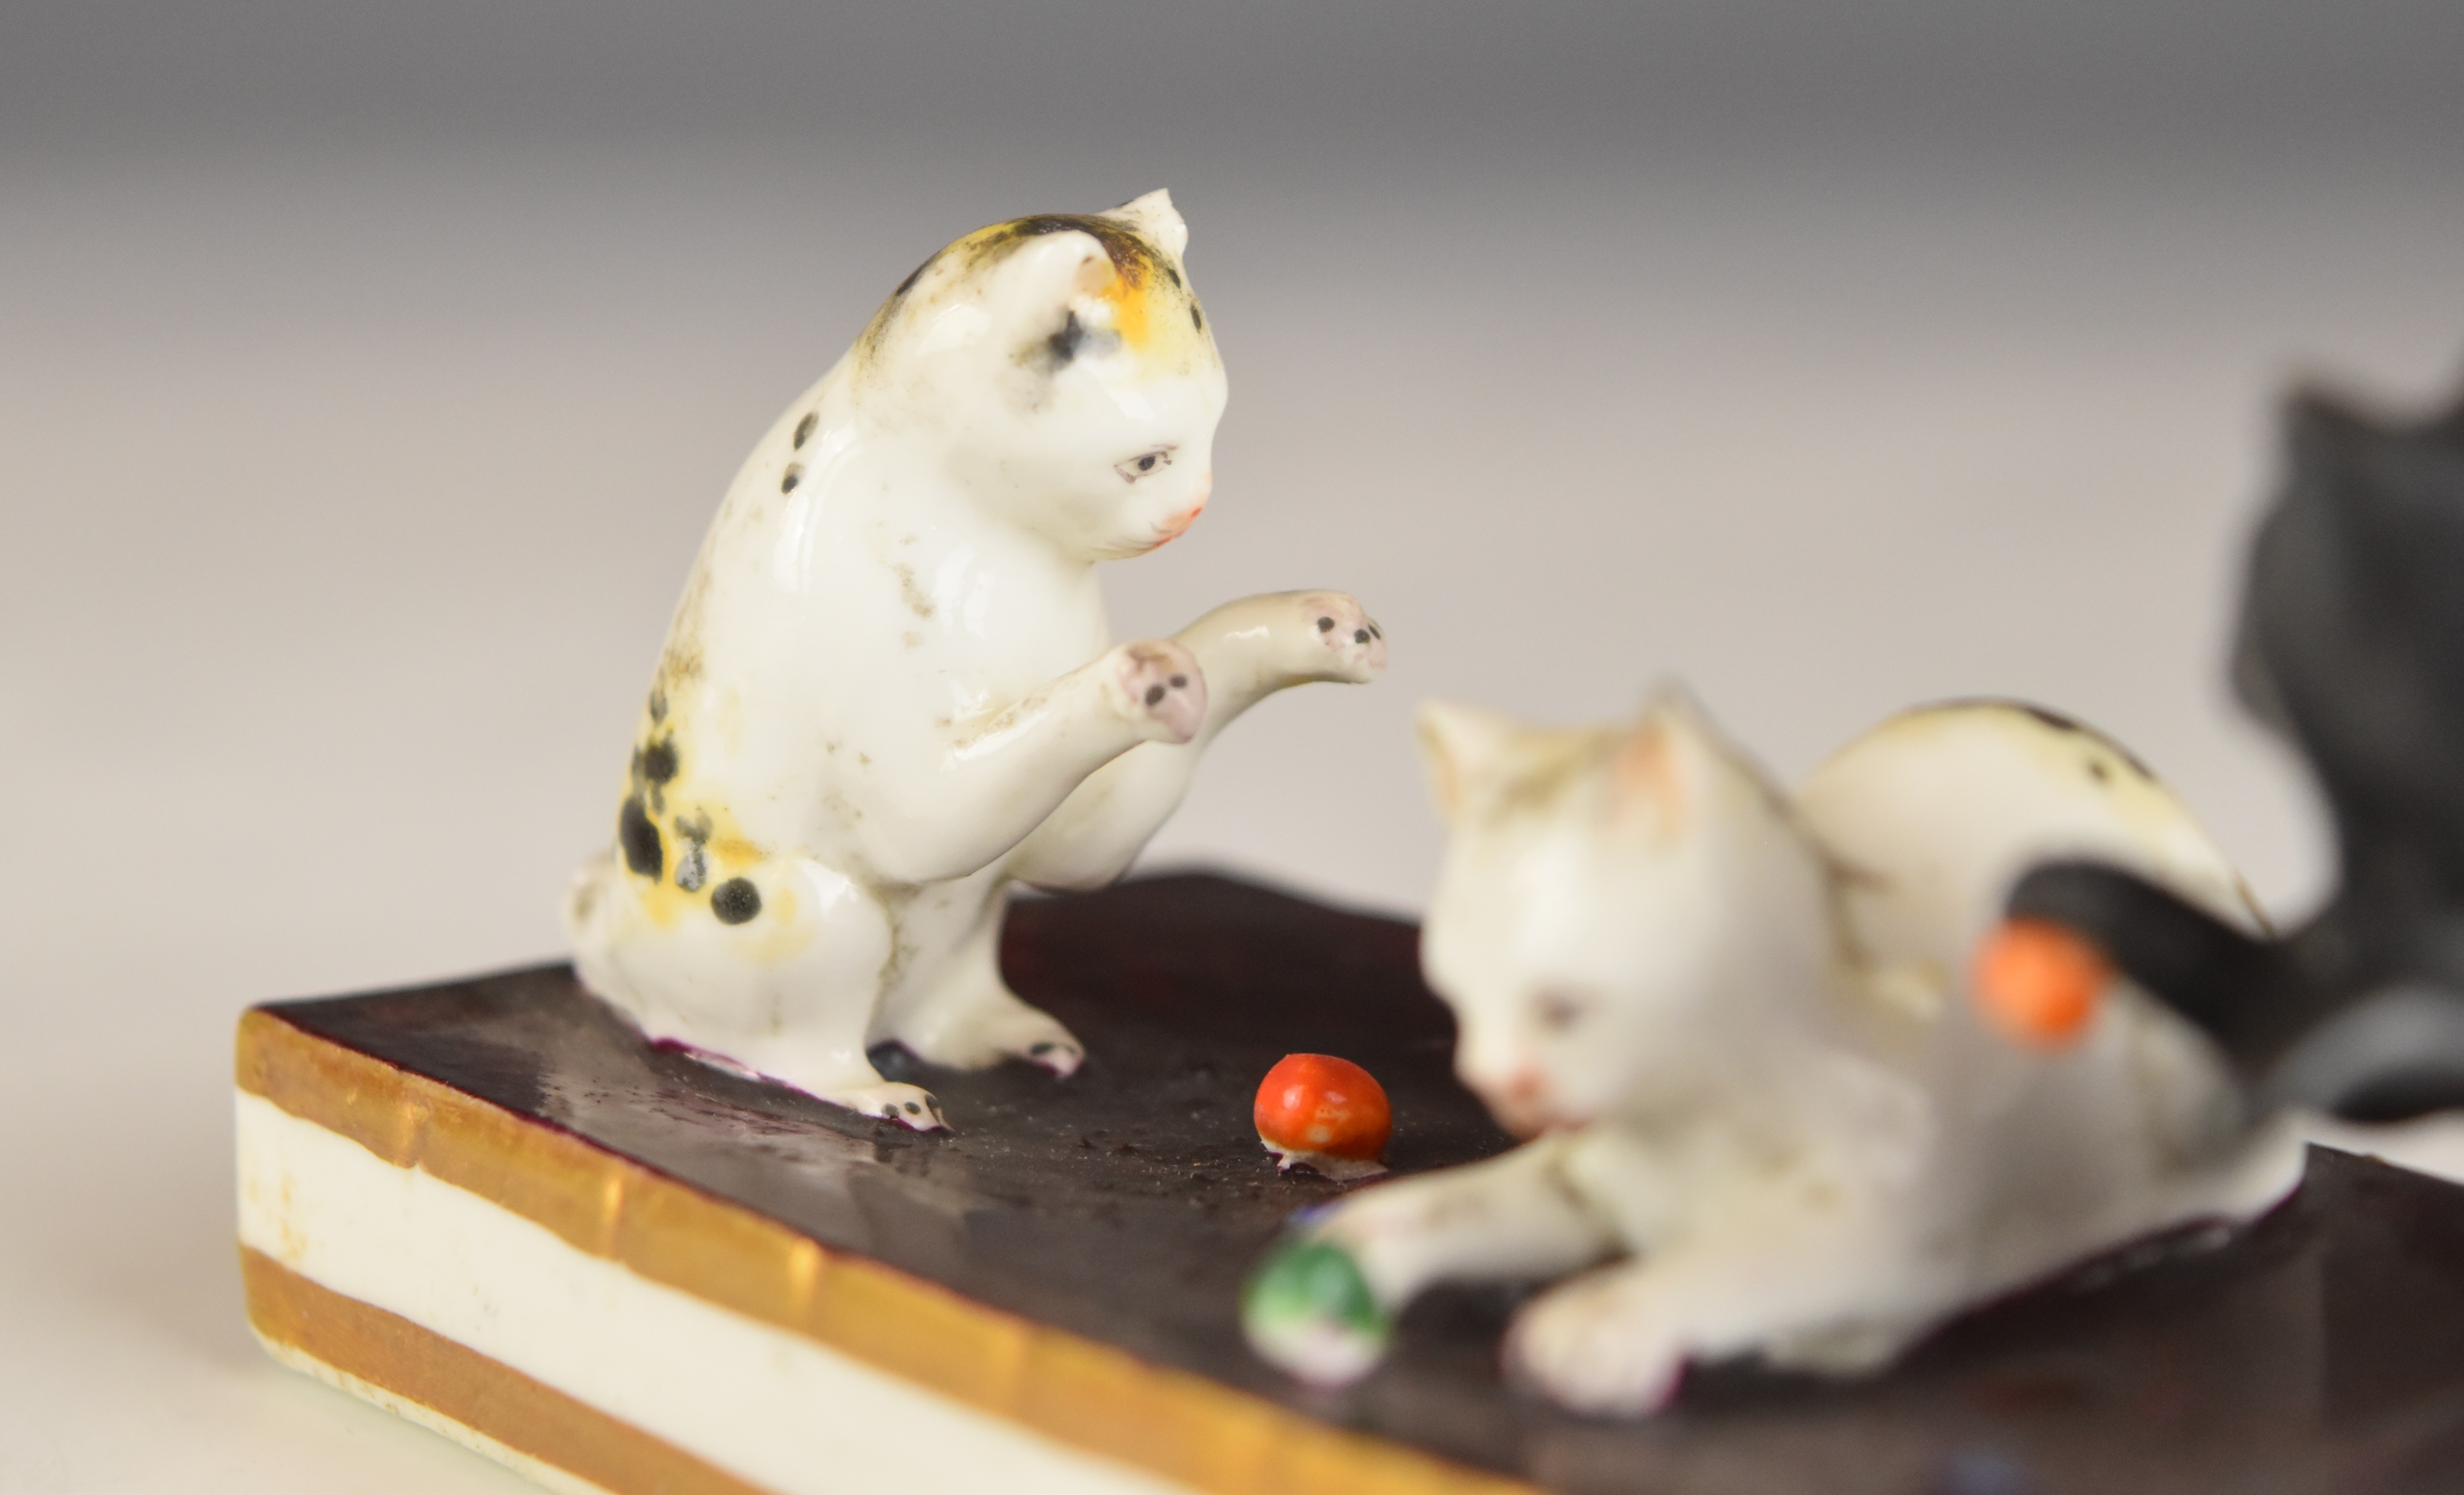 19thC novelty miniature porcelain tableau of three kittens playing, W10 x D4.5 x H4.5cm - Image 8 of 8